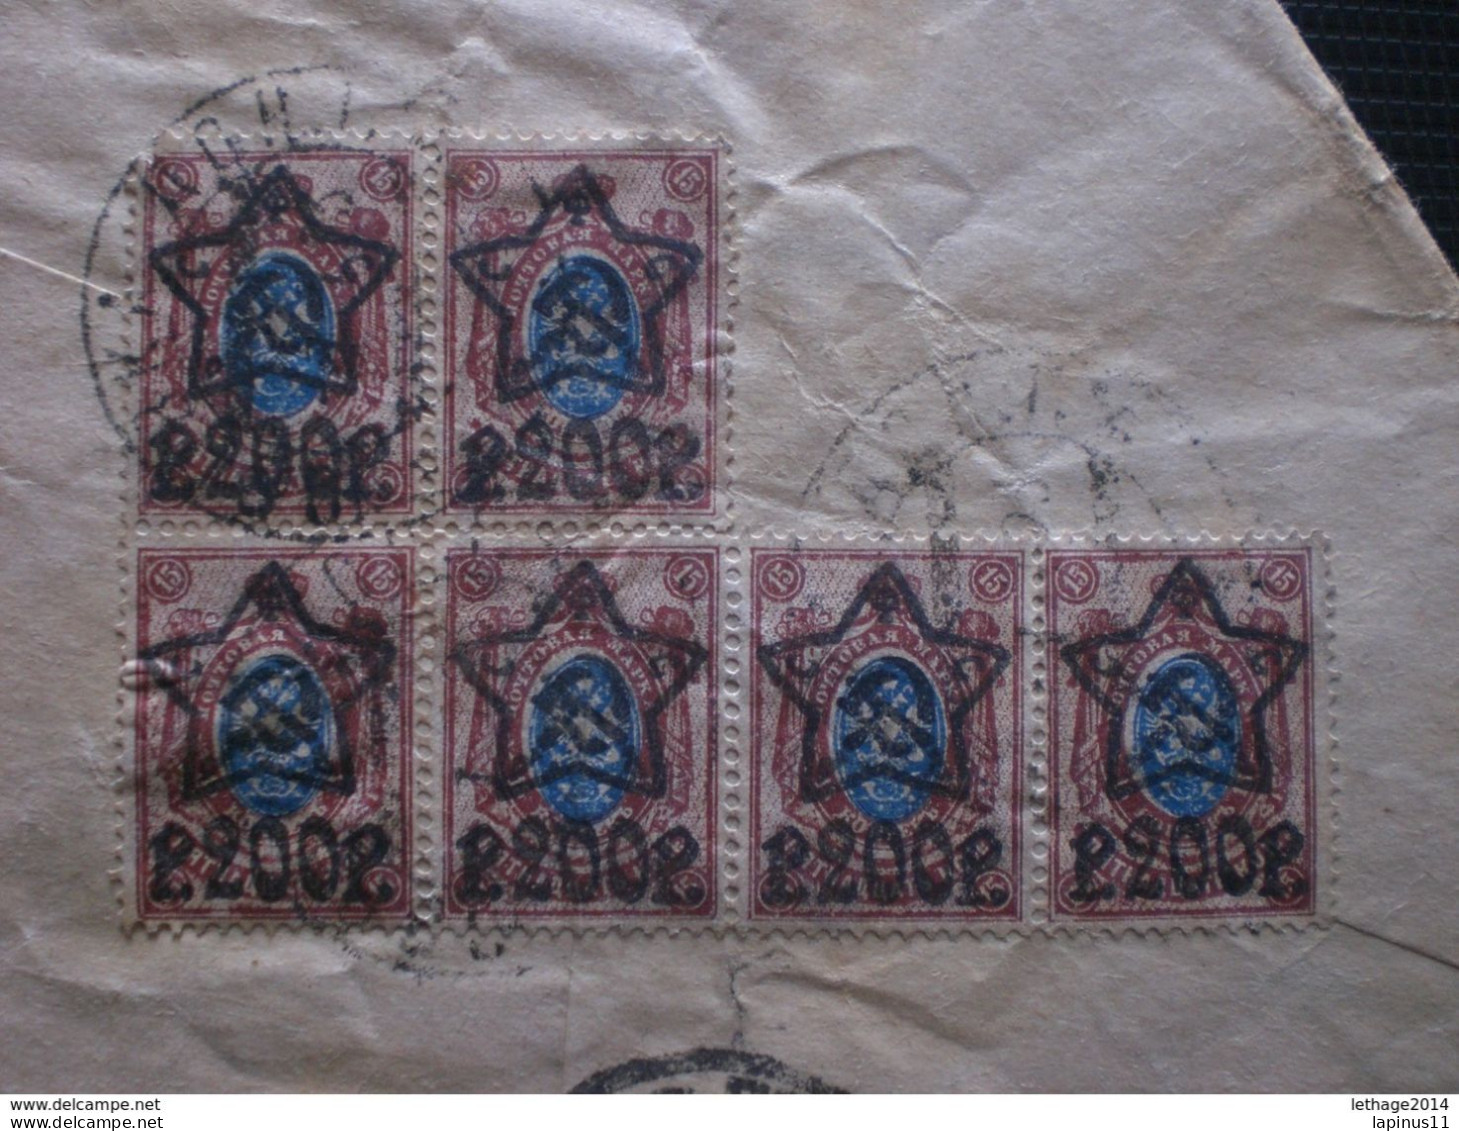 RUSSIA RUSSIE РОССИЯ STAMPS COVER 1923 RUSSIE TO ITALY FULL STAMPS RRR RIF.TAGG. (79) - Storia Postale